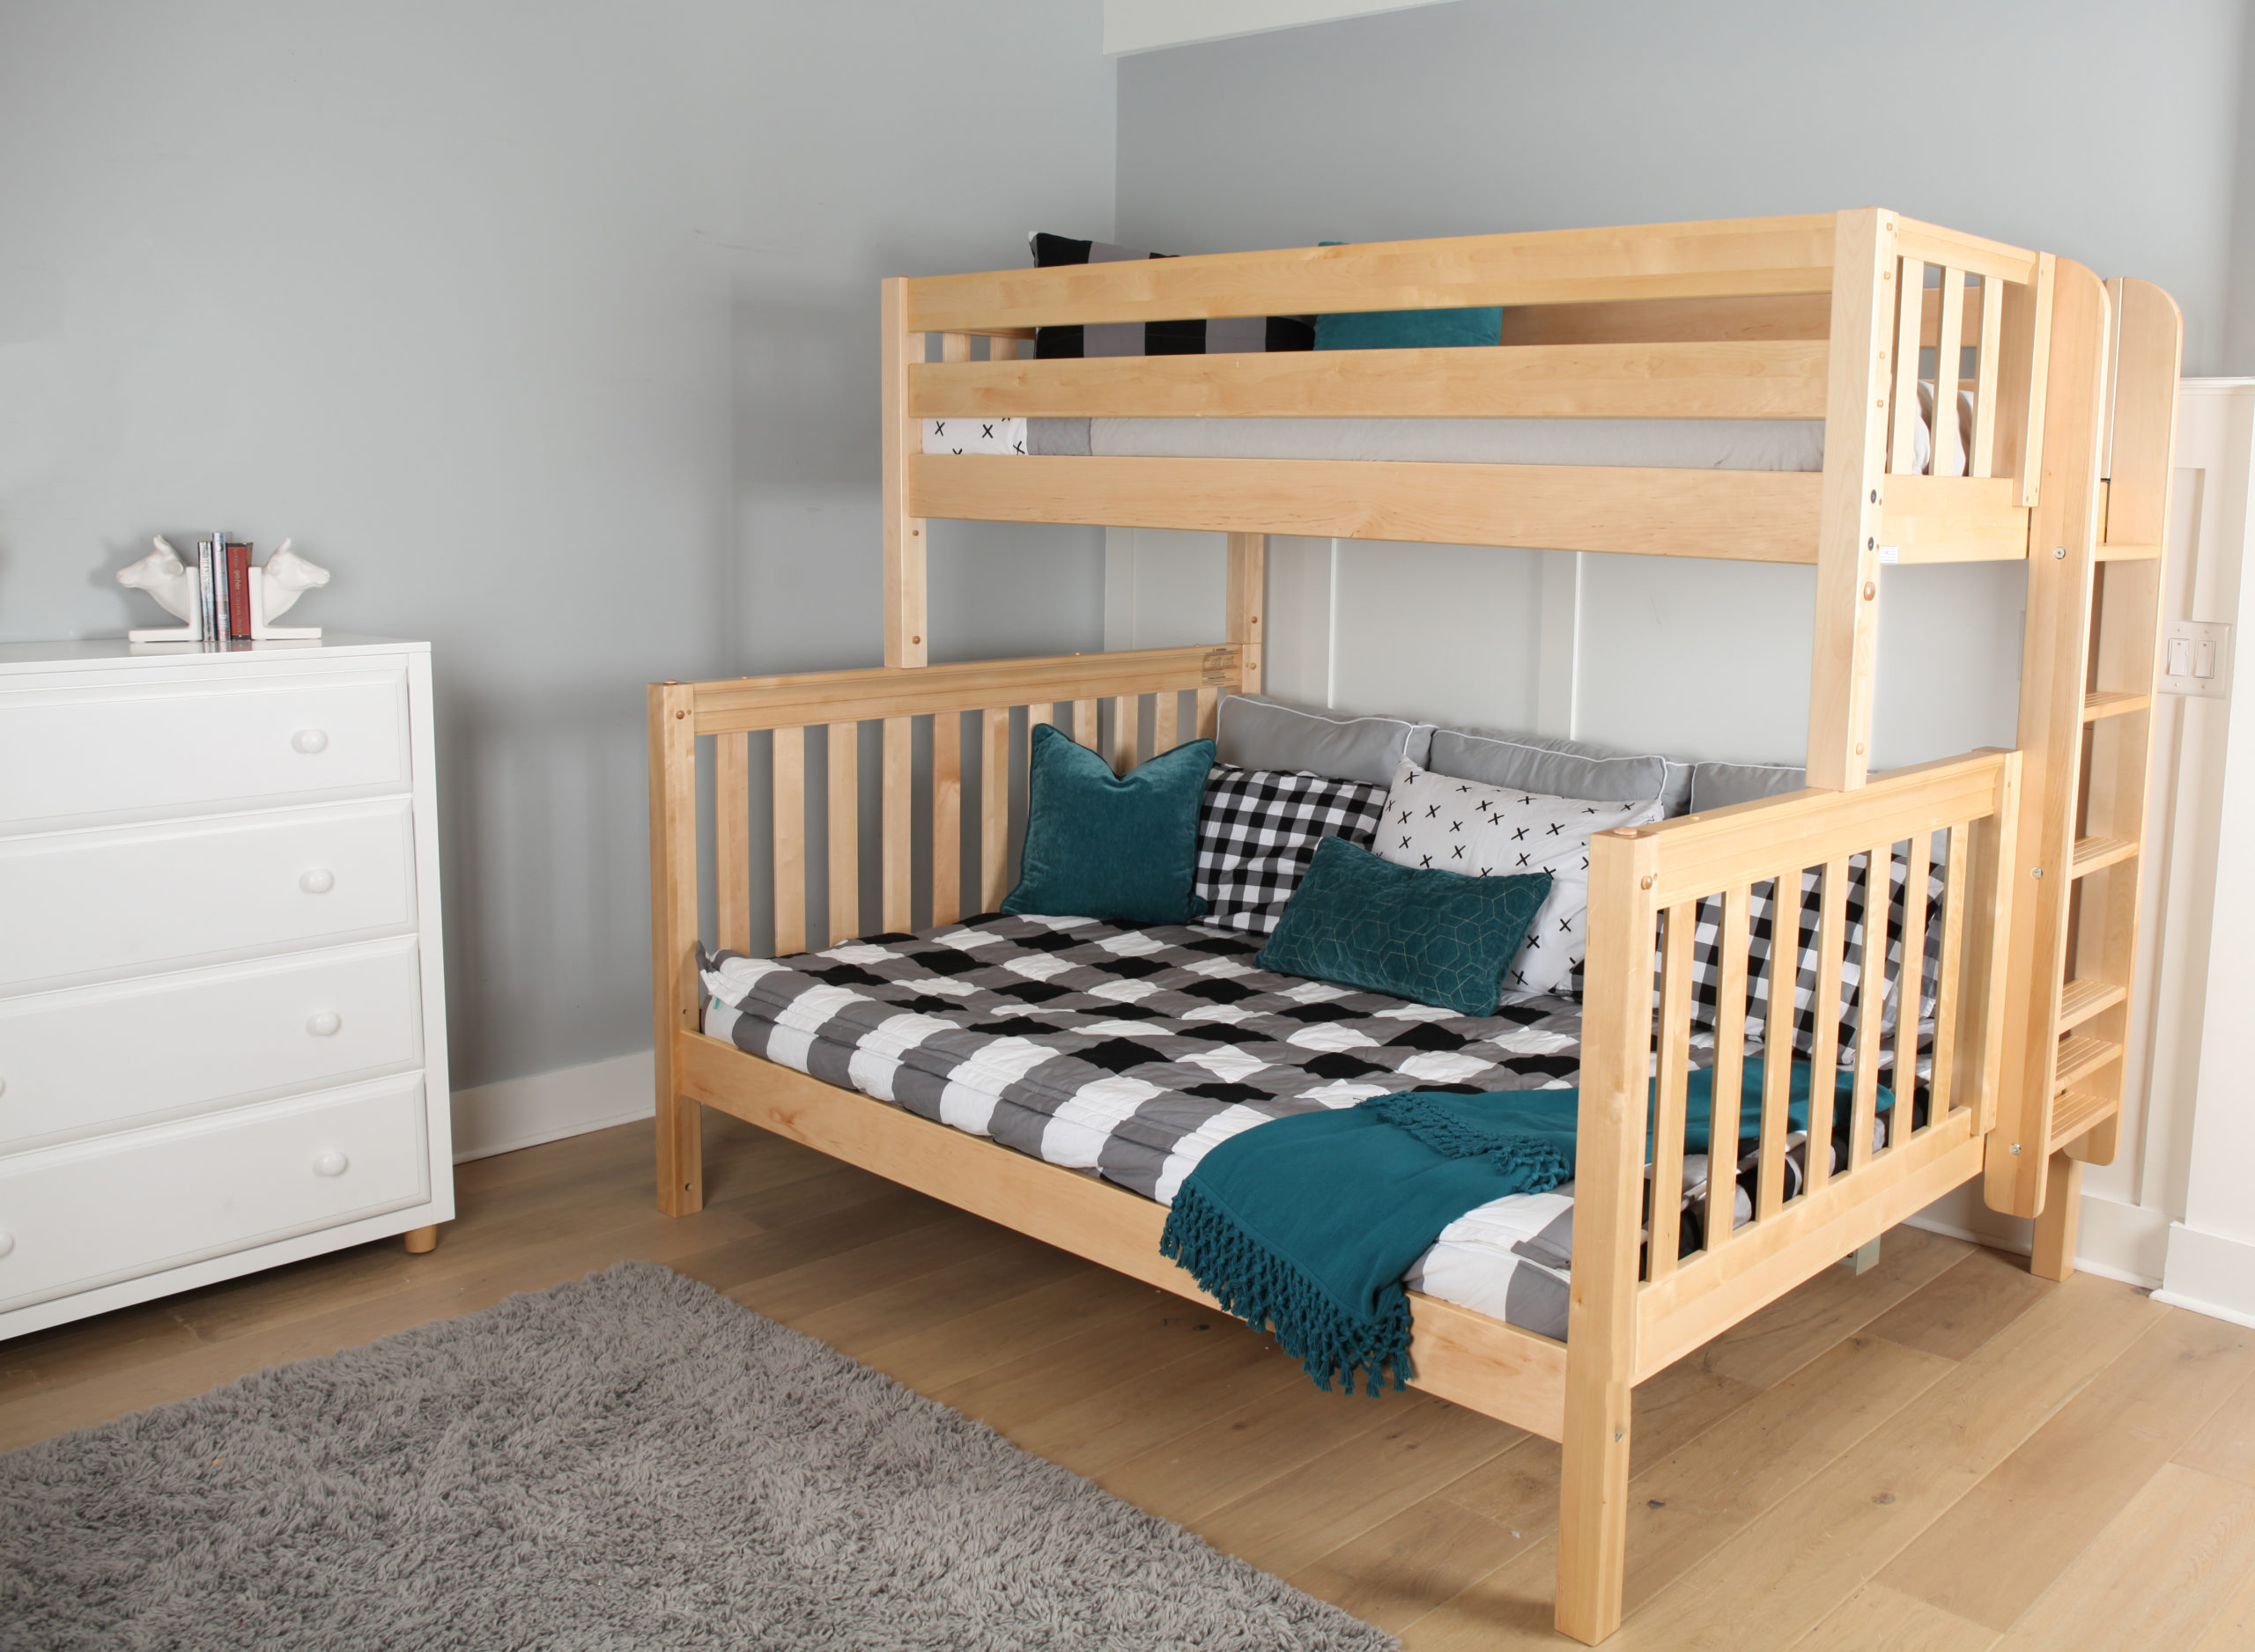 What Is Crib Mattress Learning The, Bunk Beds For Crib Mattresses